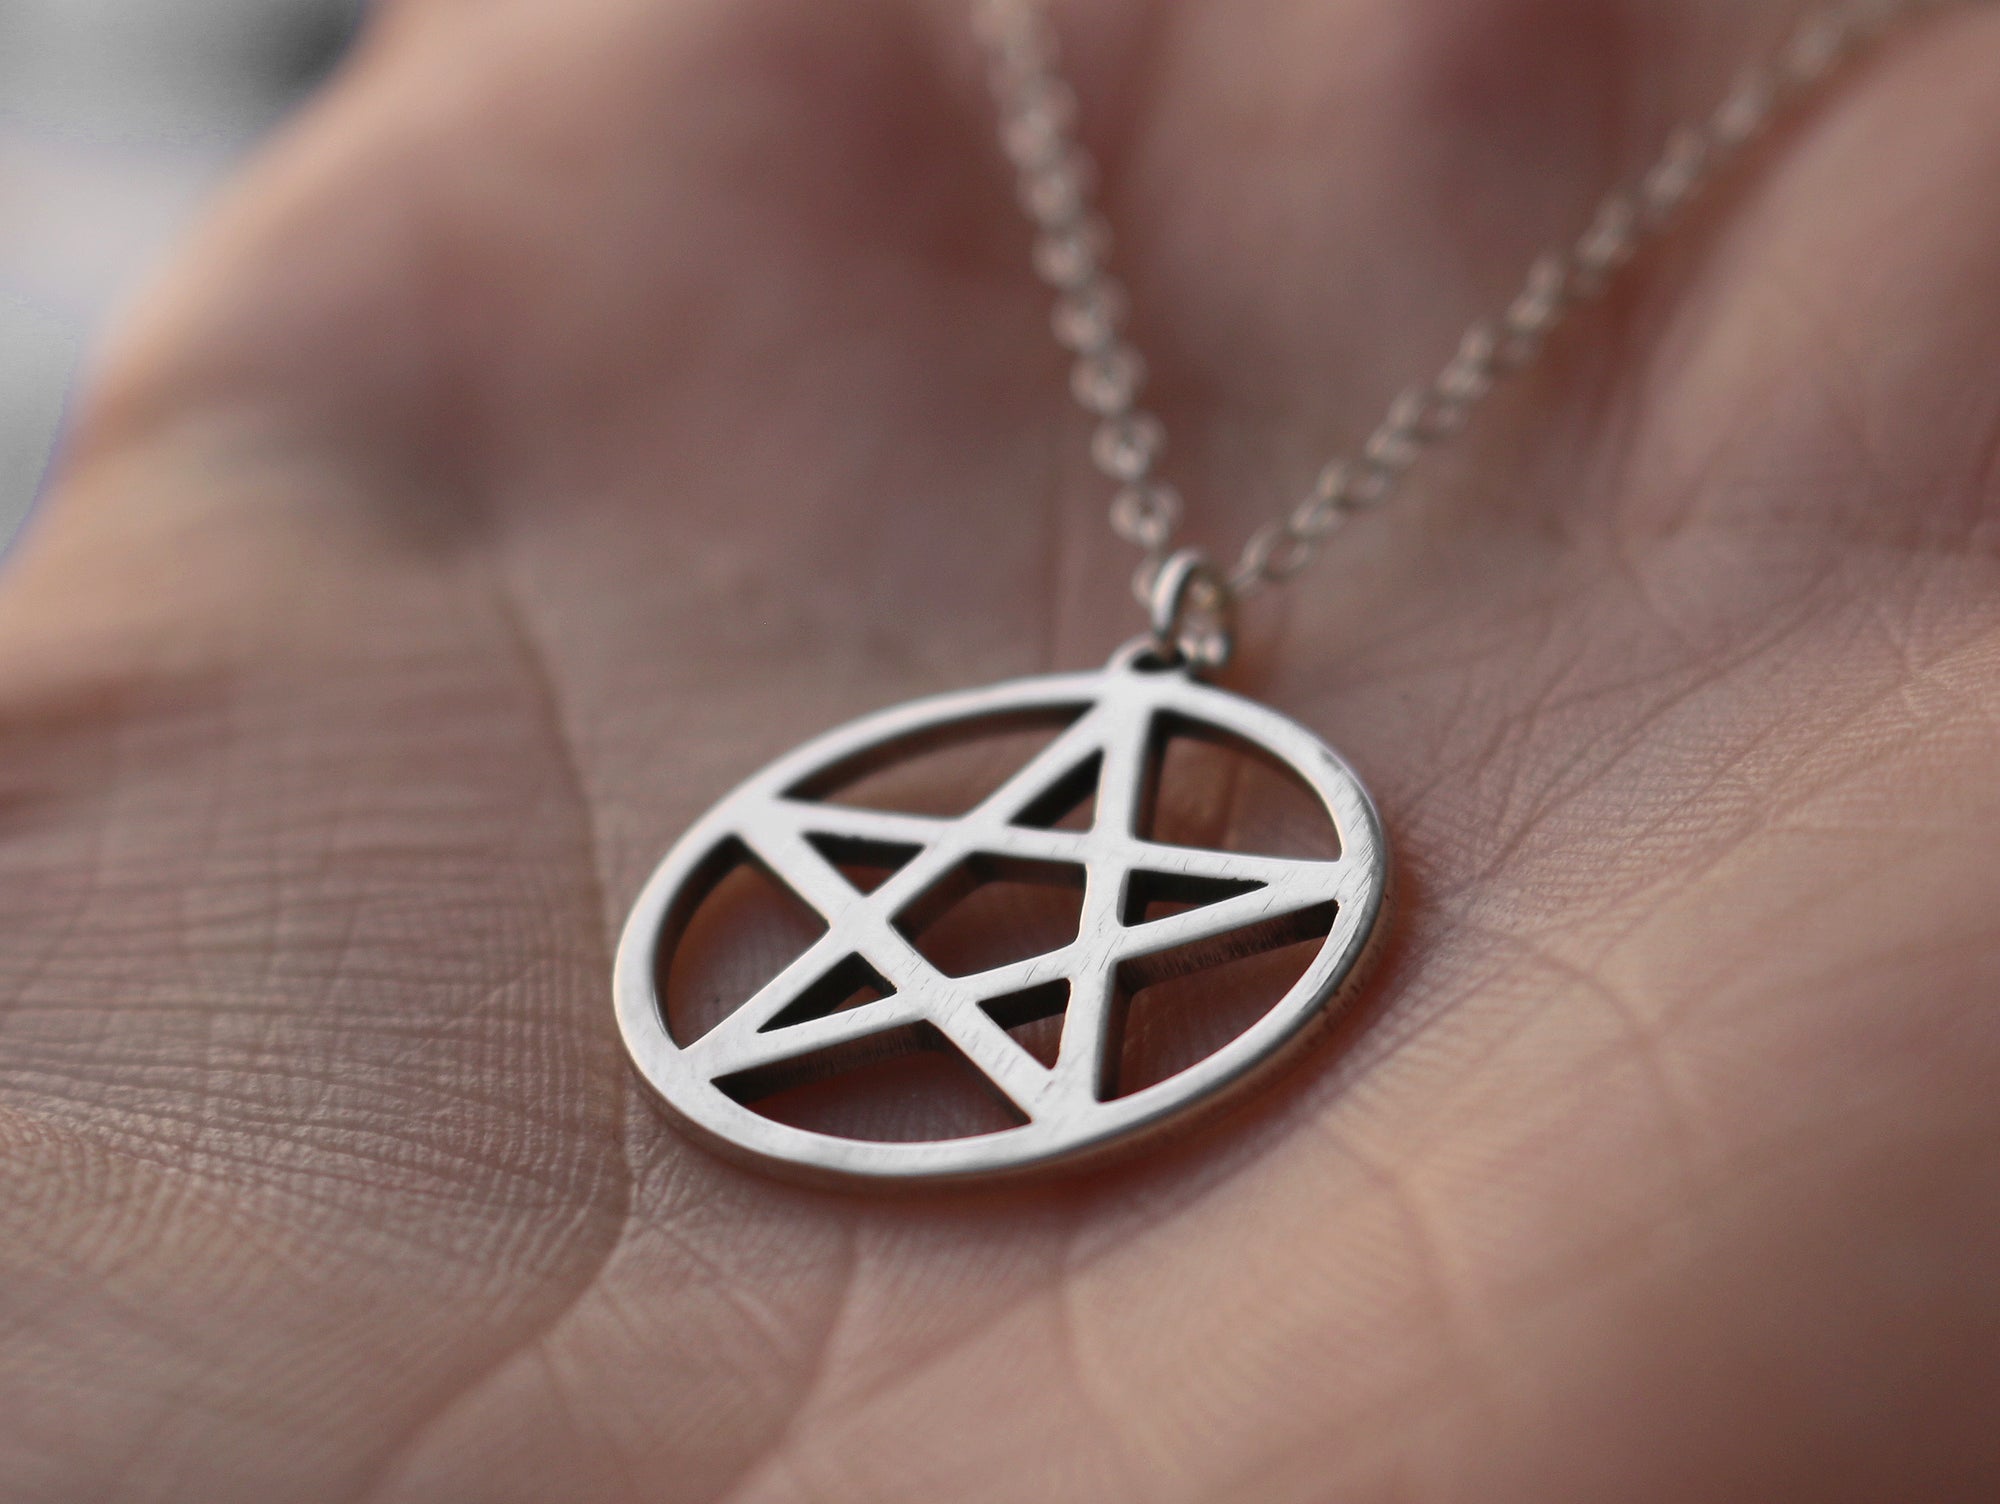 Silver pentagram charm, Pentacle star pendants for jewelry making